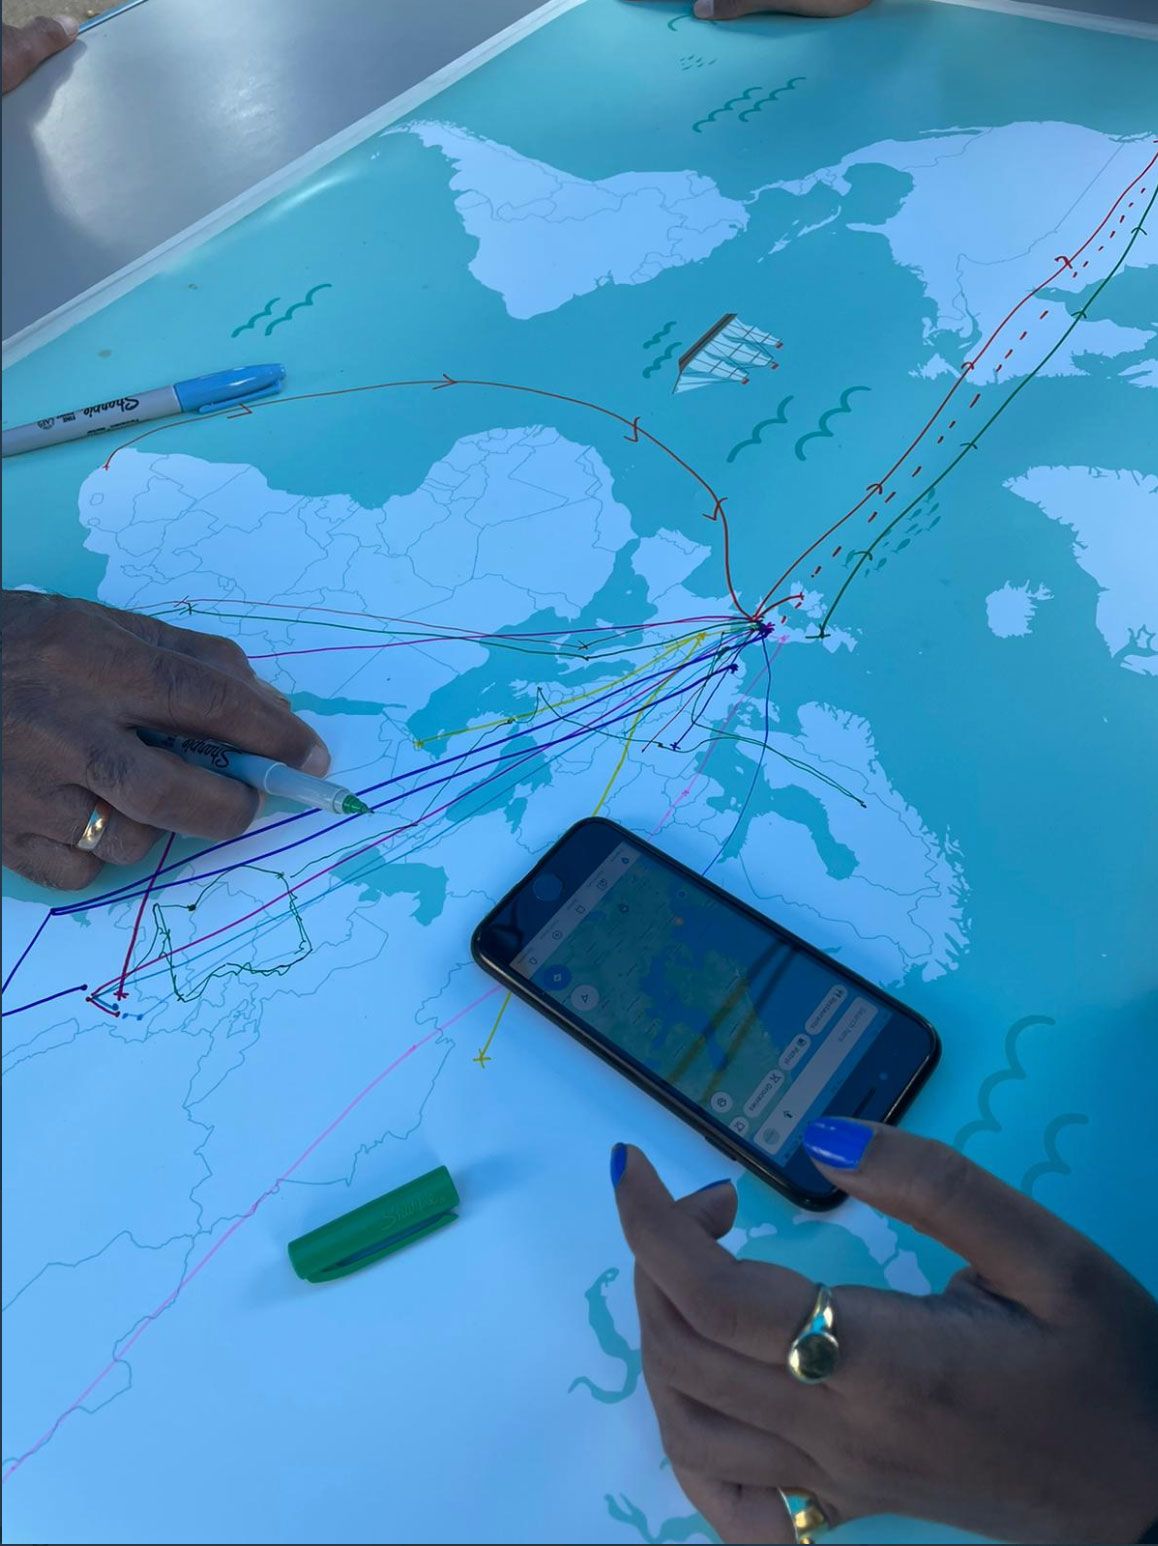 Two people's hands rest on a map of the world which has pen lines on it tracing routes from other countries to the UK. There is also a smart phone on the table.